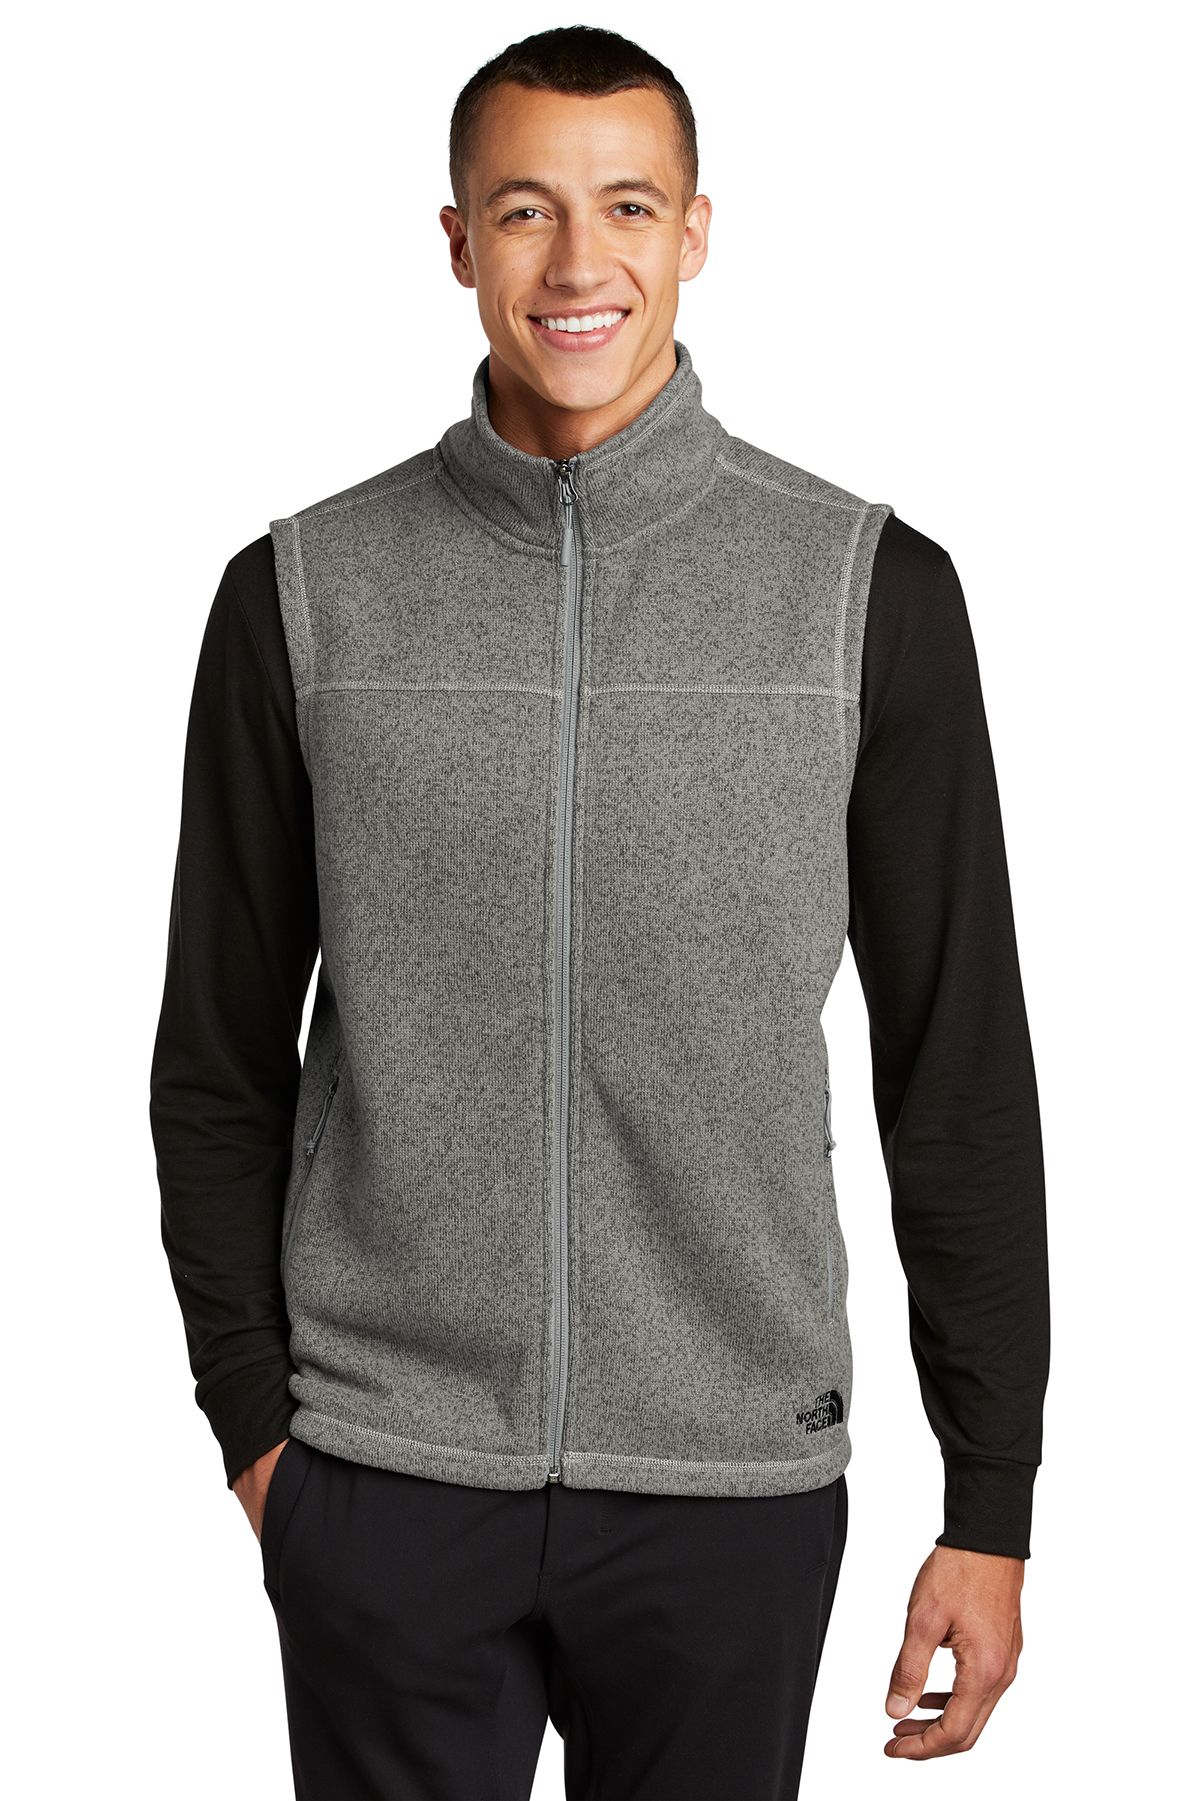 Kwadrant Vervreemding long The North Face Sweater Fleece Vest | Product | Company Casuals